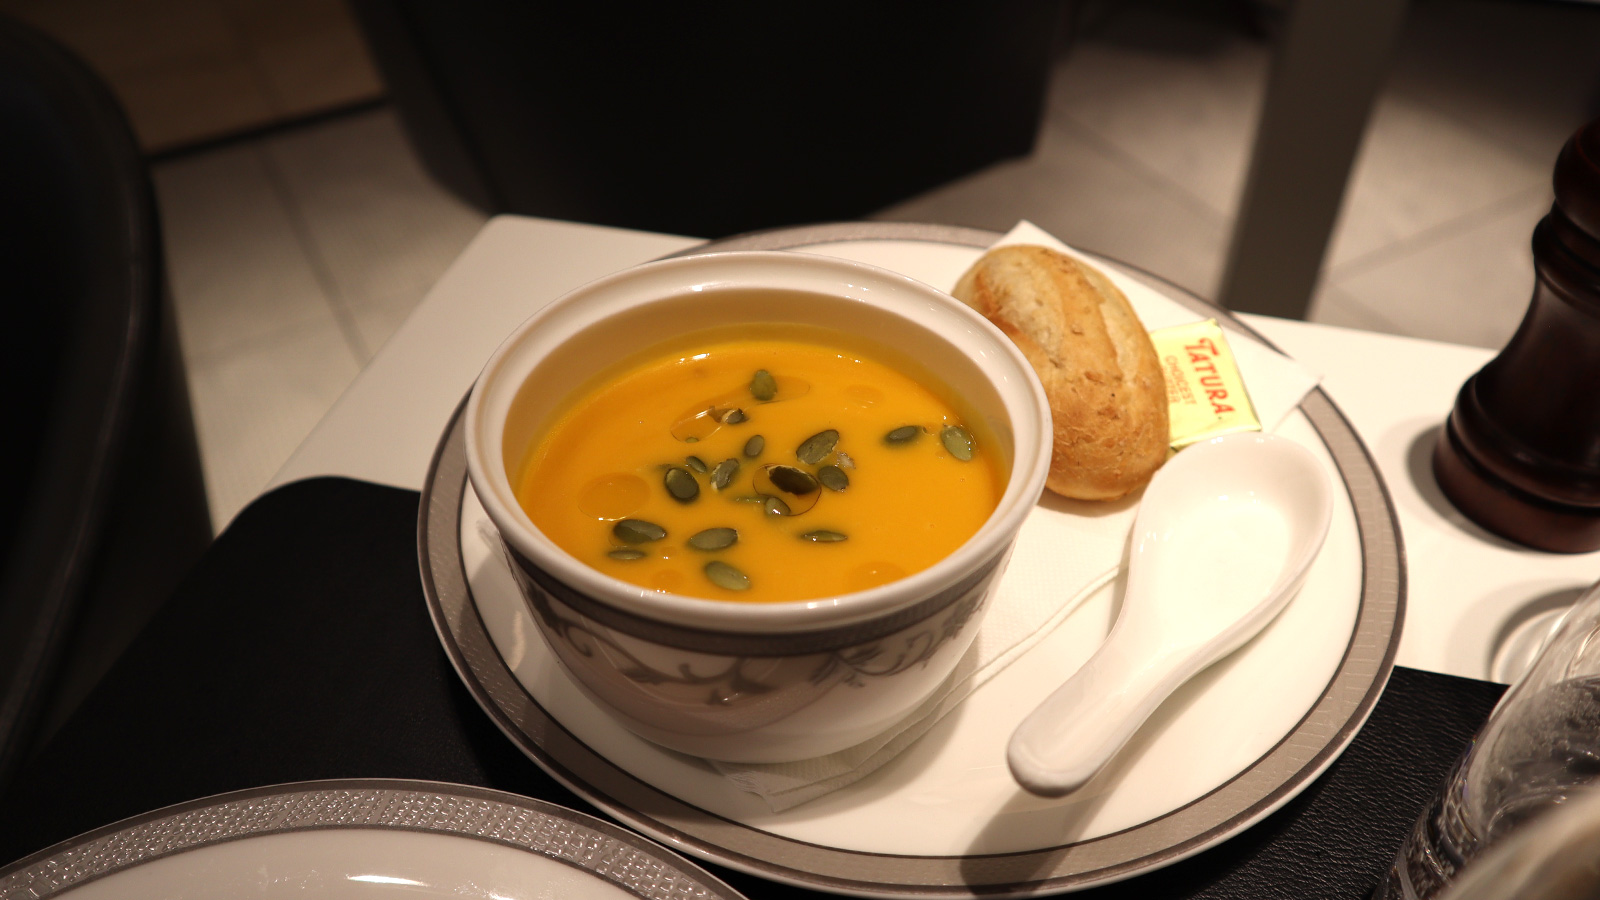 Roasted pumpkin soup in the Singapore Airlines SilverKris First Class Lounge, Melbourne